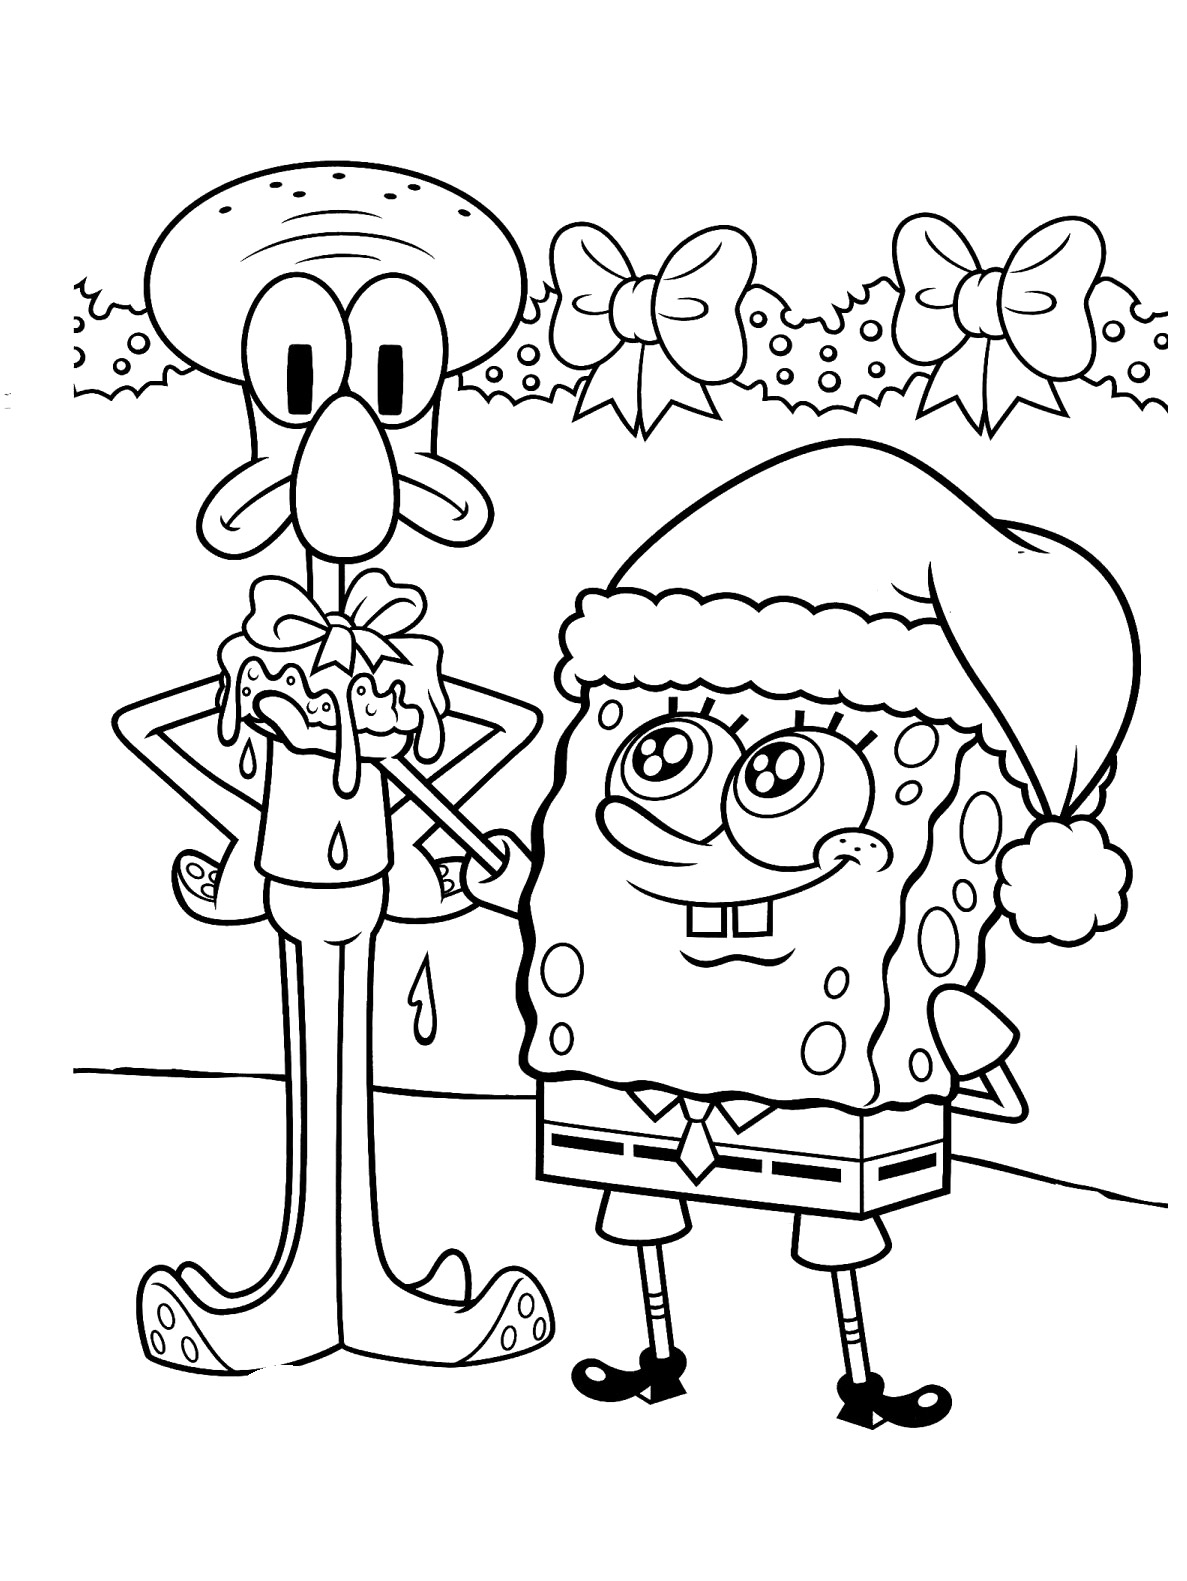 Funny Spongebob Coloring Pages Printables 69